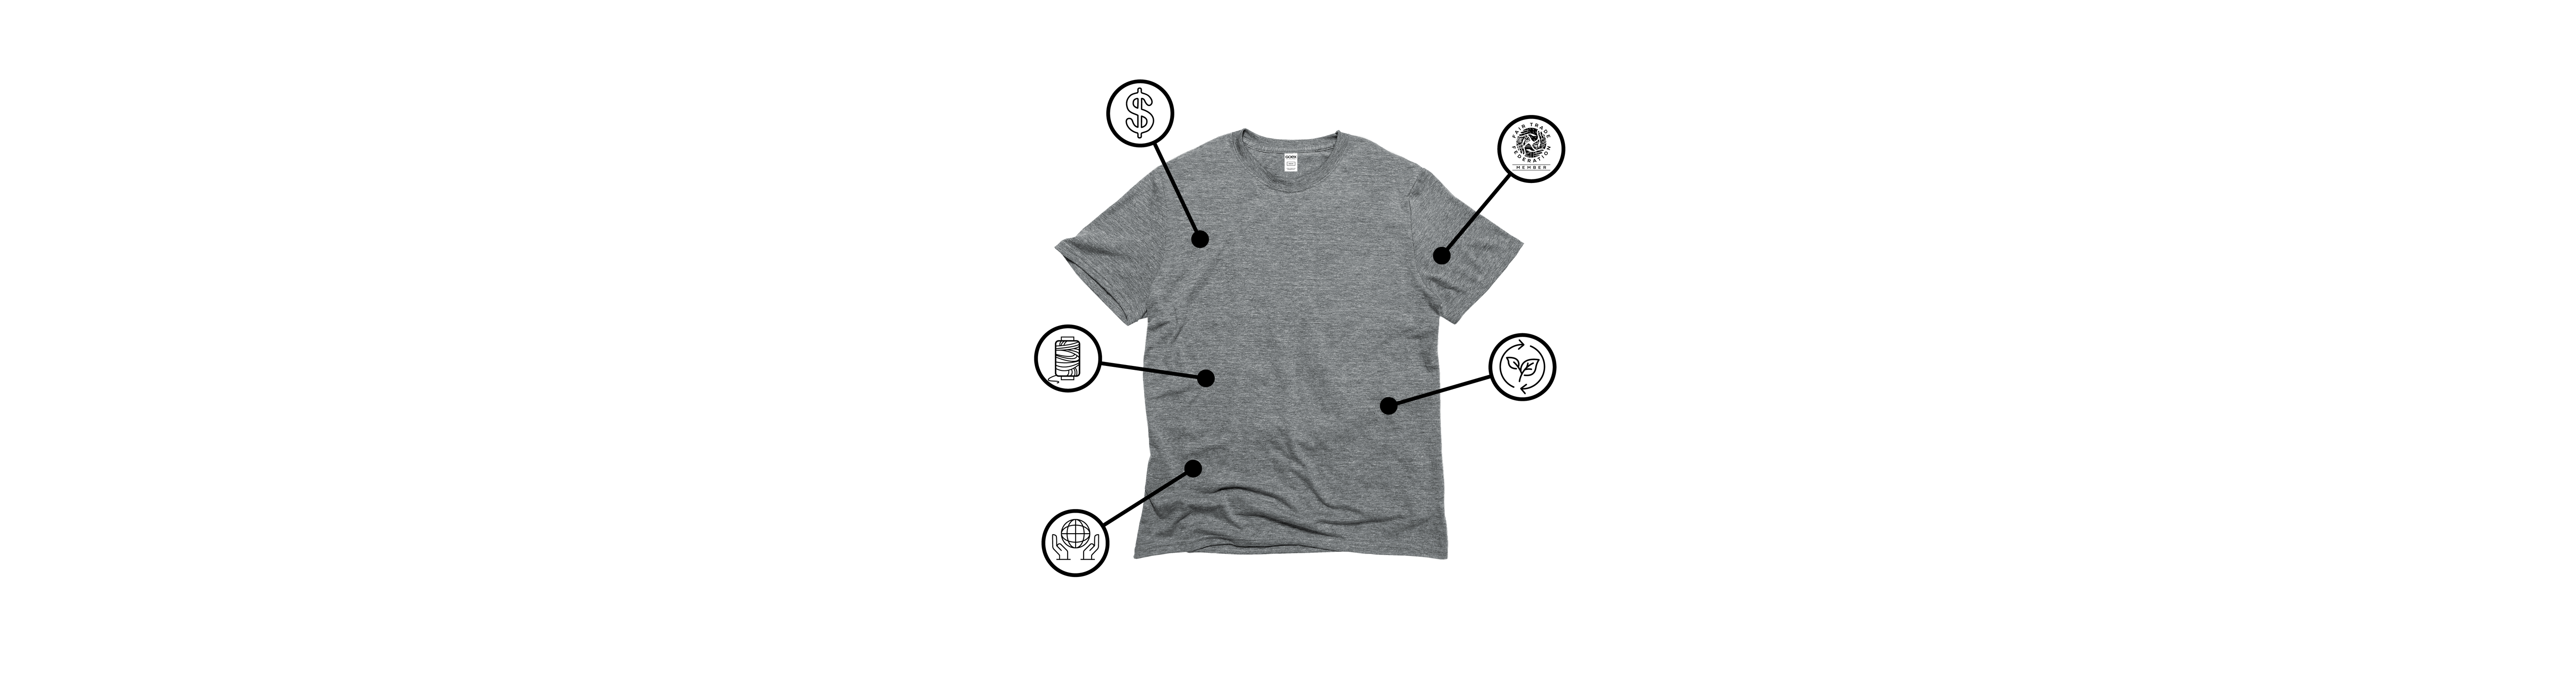 Flat Lay of GOEX Unisex and Men's Eco Triblend Tee in Heather Grey with Icons